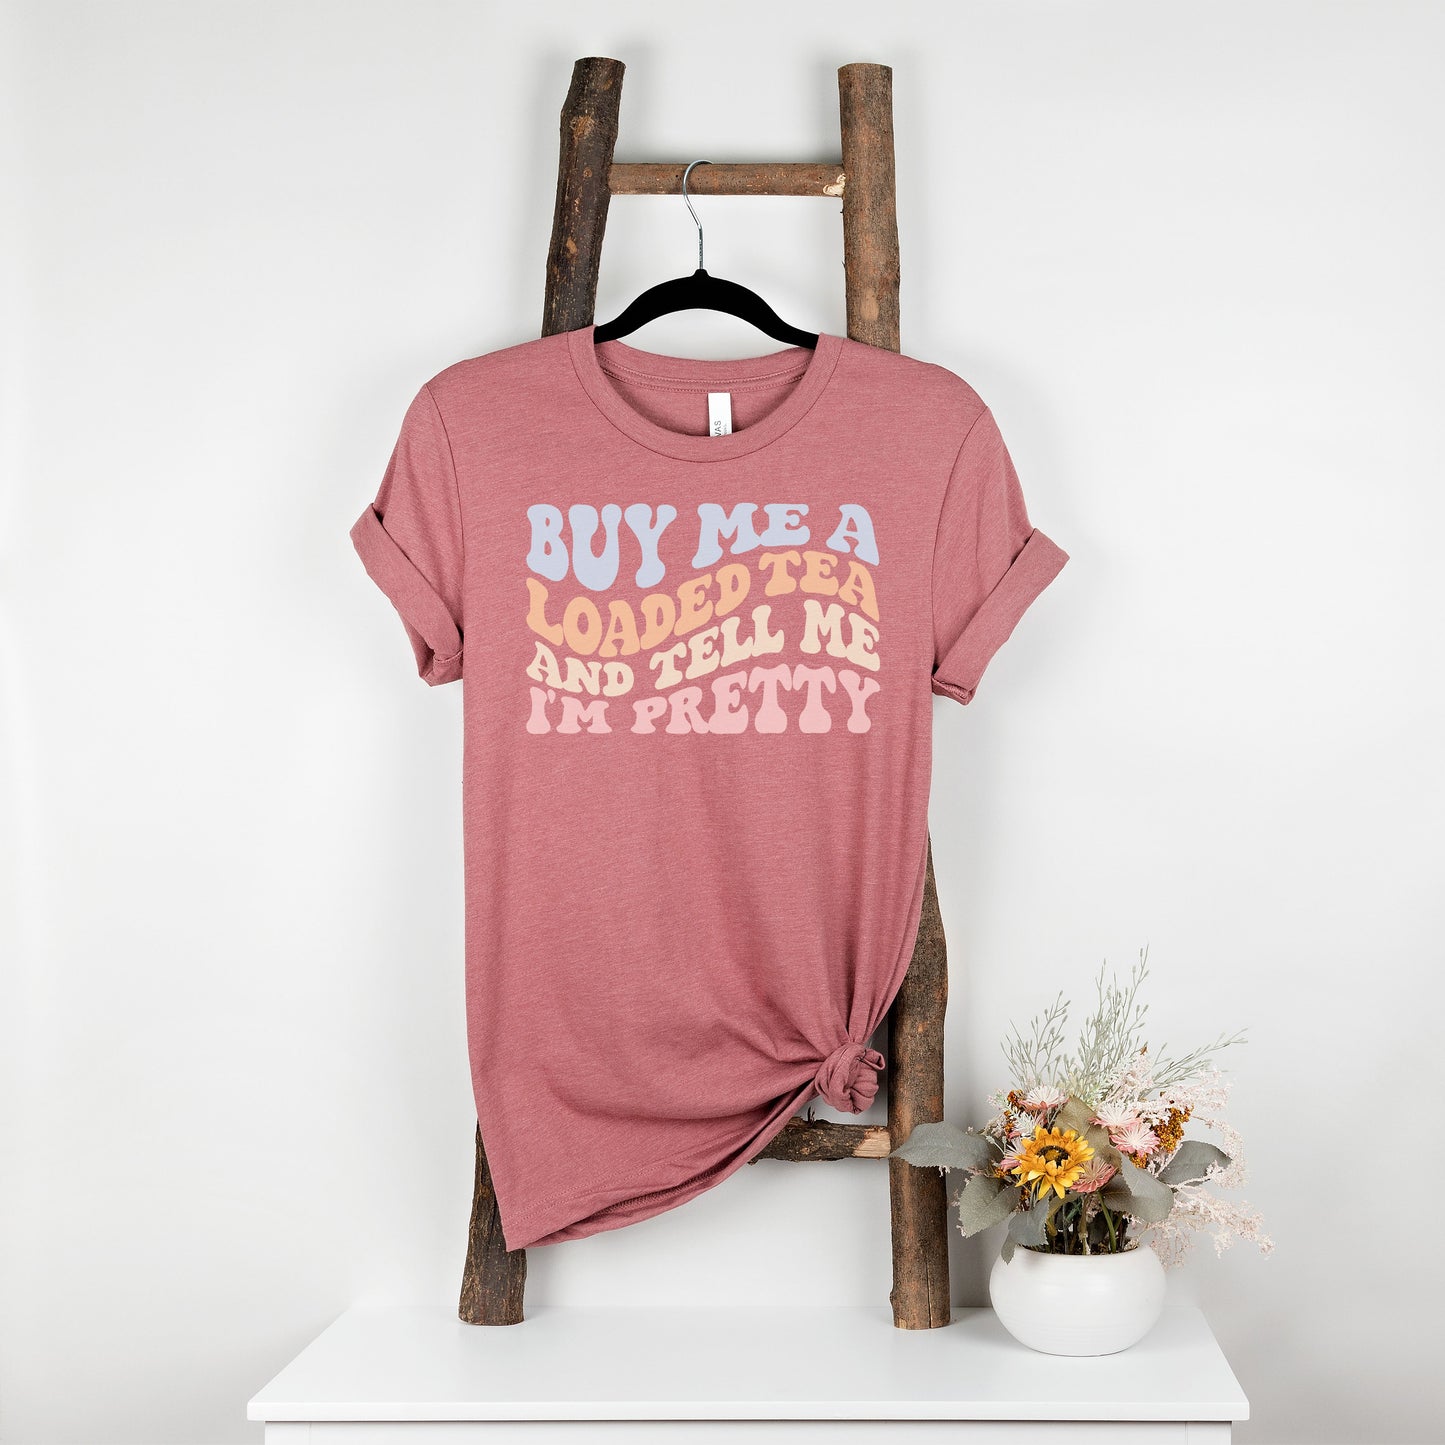 Energize Your Day: Buy Me a Loaded Tea...Tee Shirt